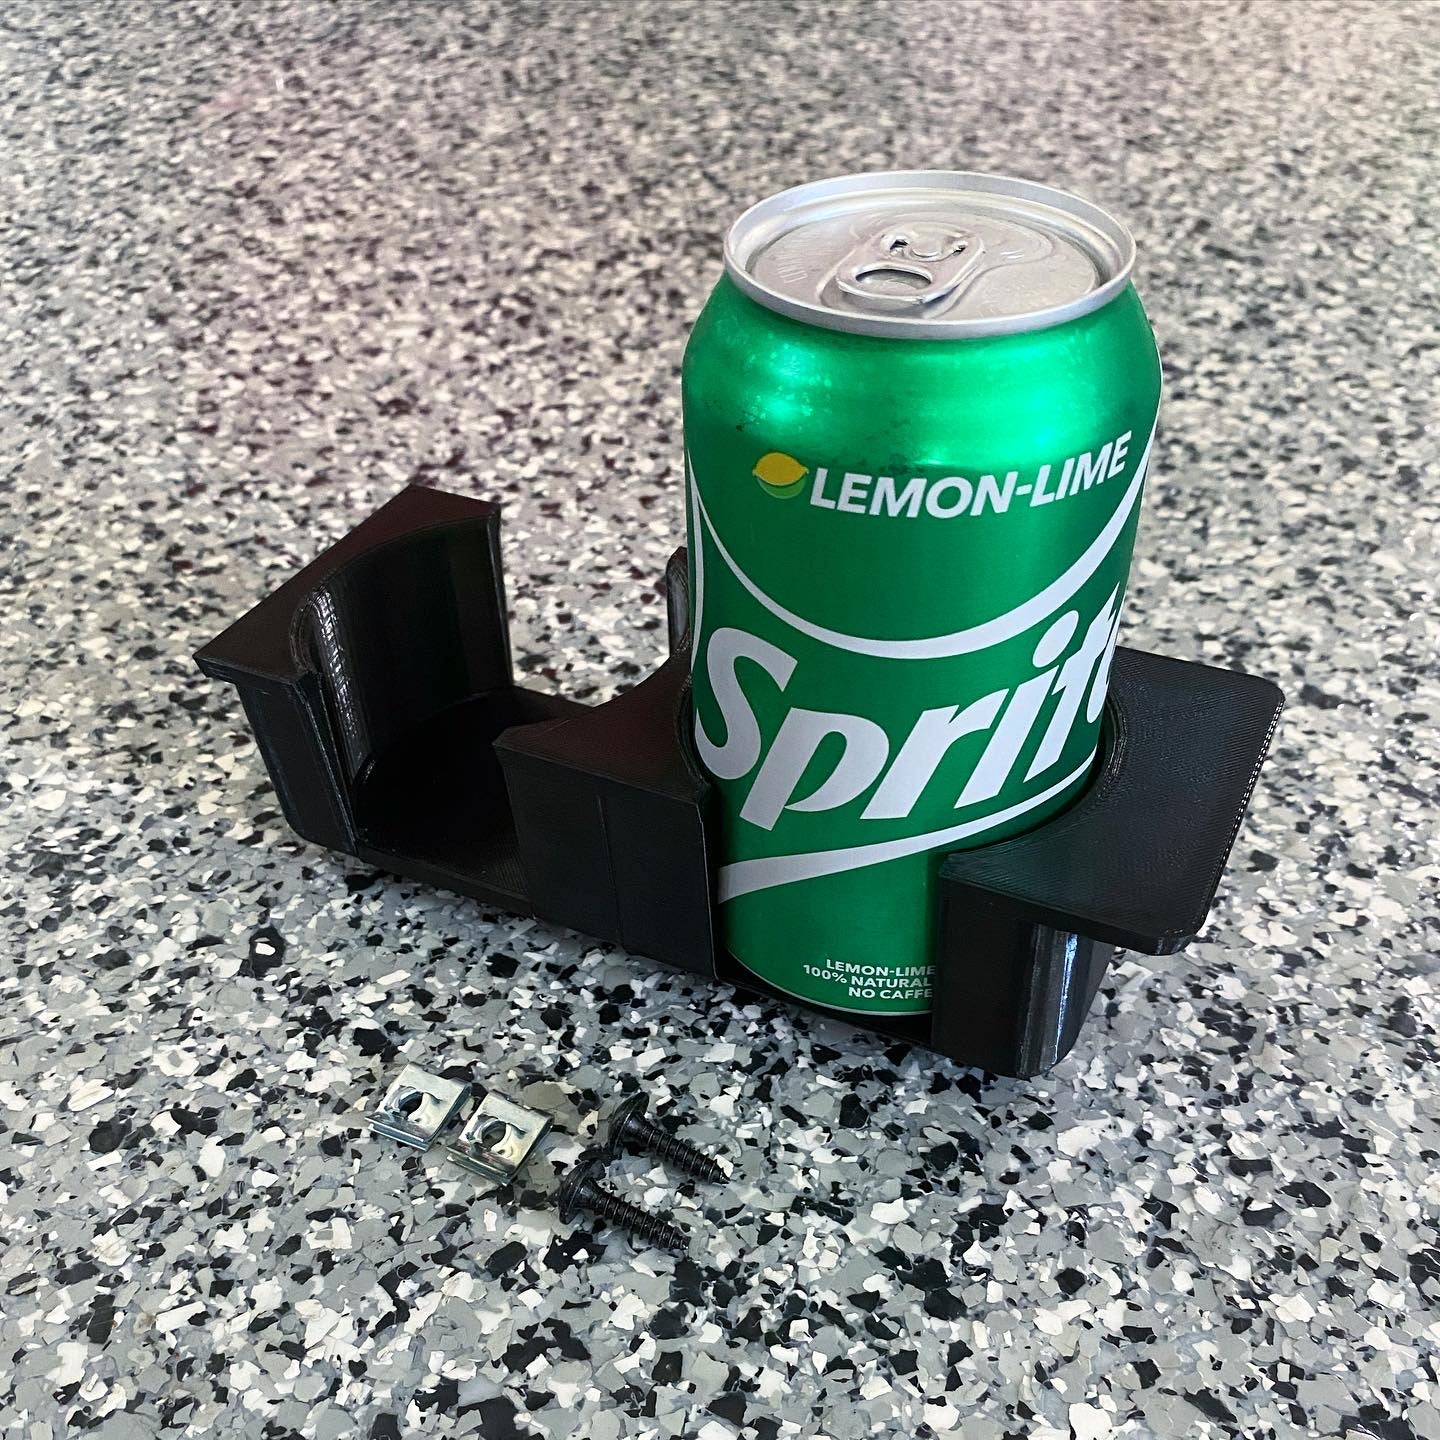 E36 cup holder solution